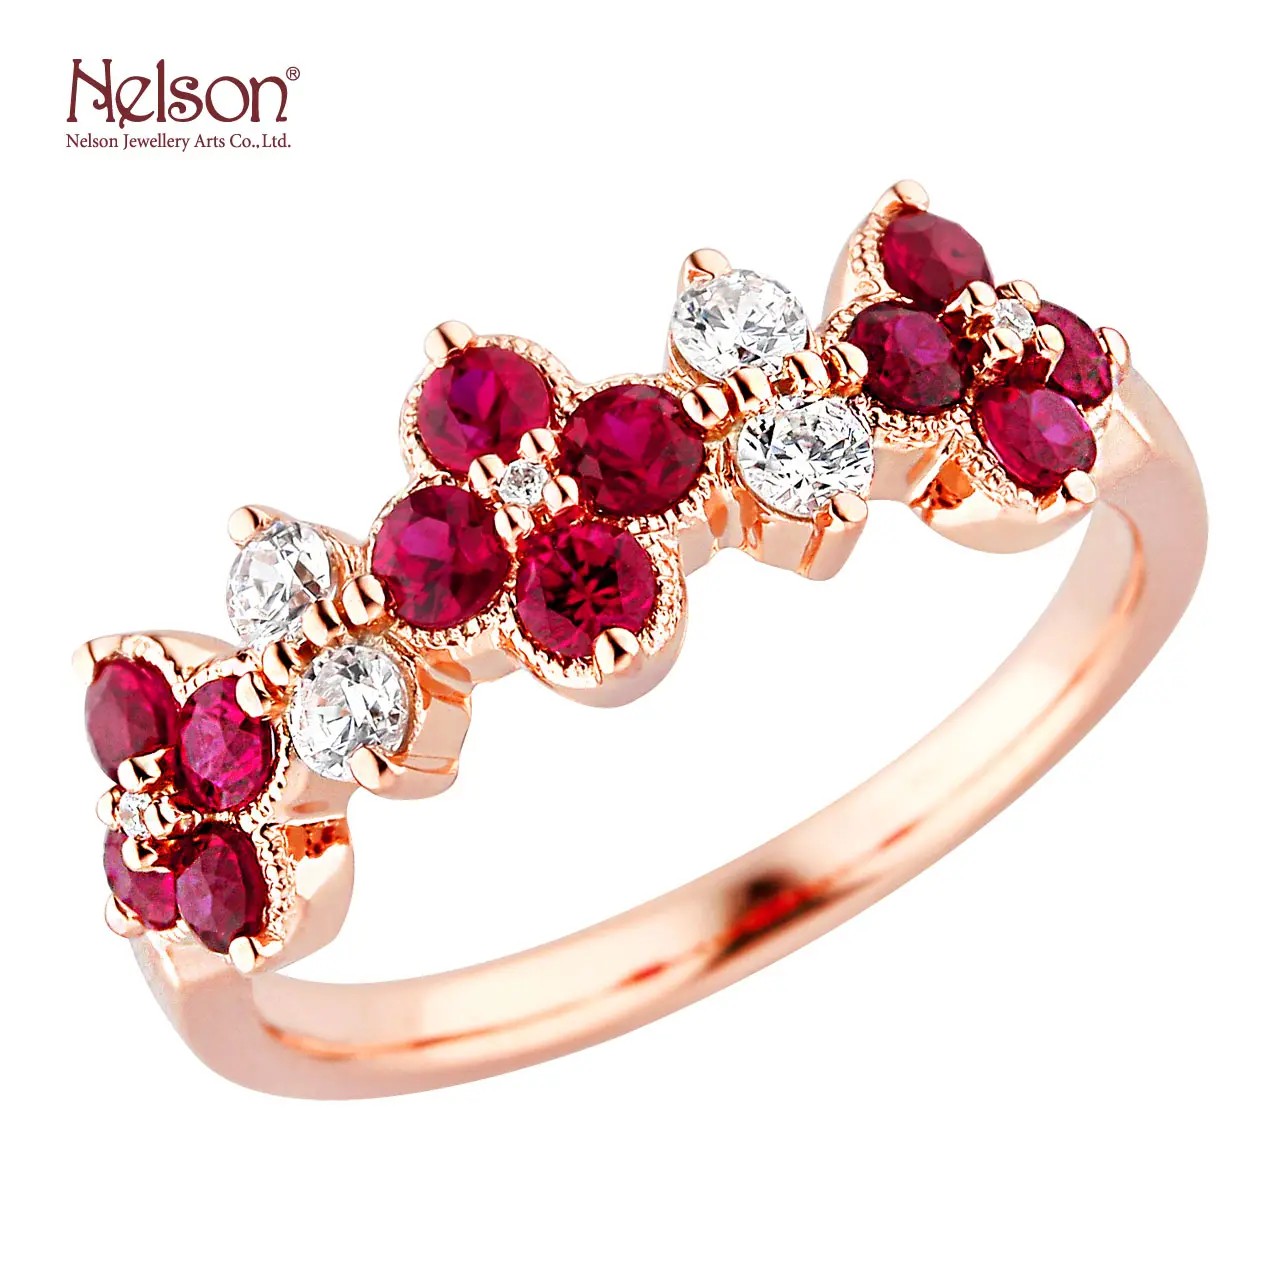 Daily Wear zero risk wholesale price jewelry no MOQ OEM ODM 18K 750 Rose Gold Ruby Gemstone Diamond Floral Ring For Women